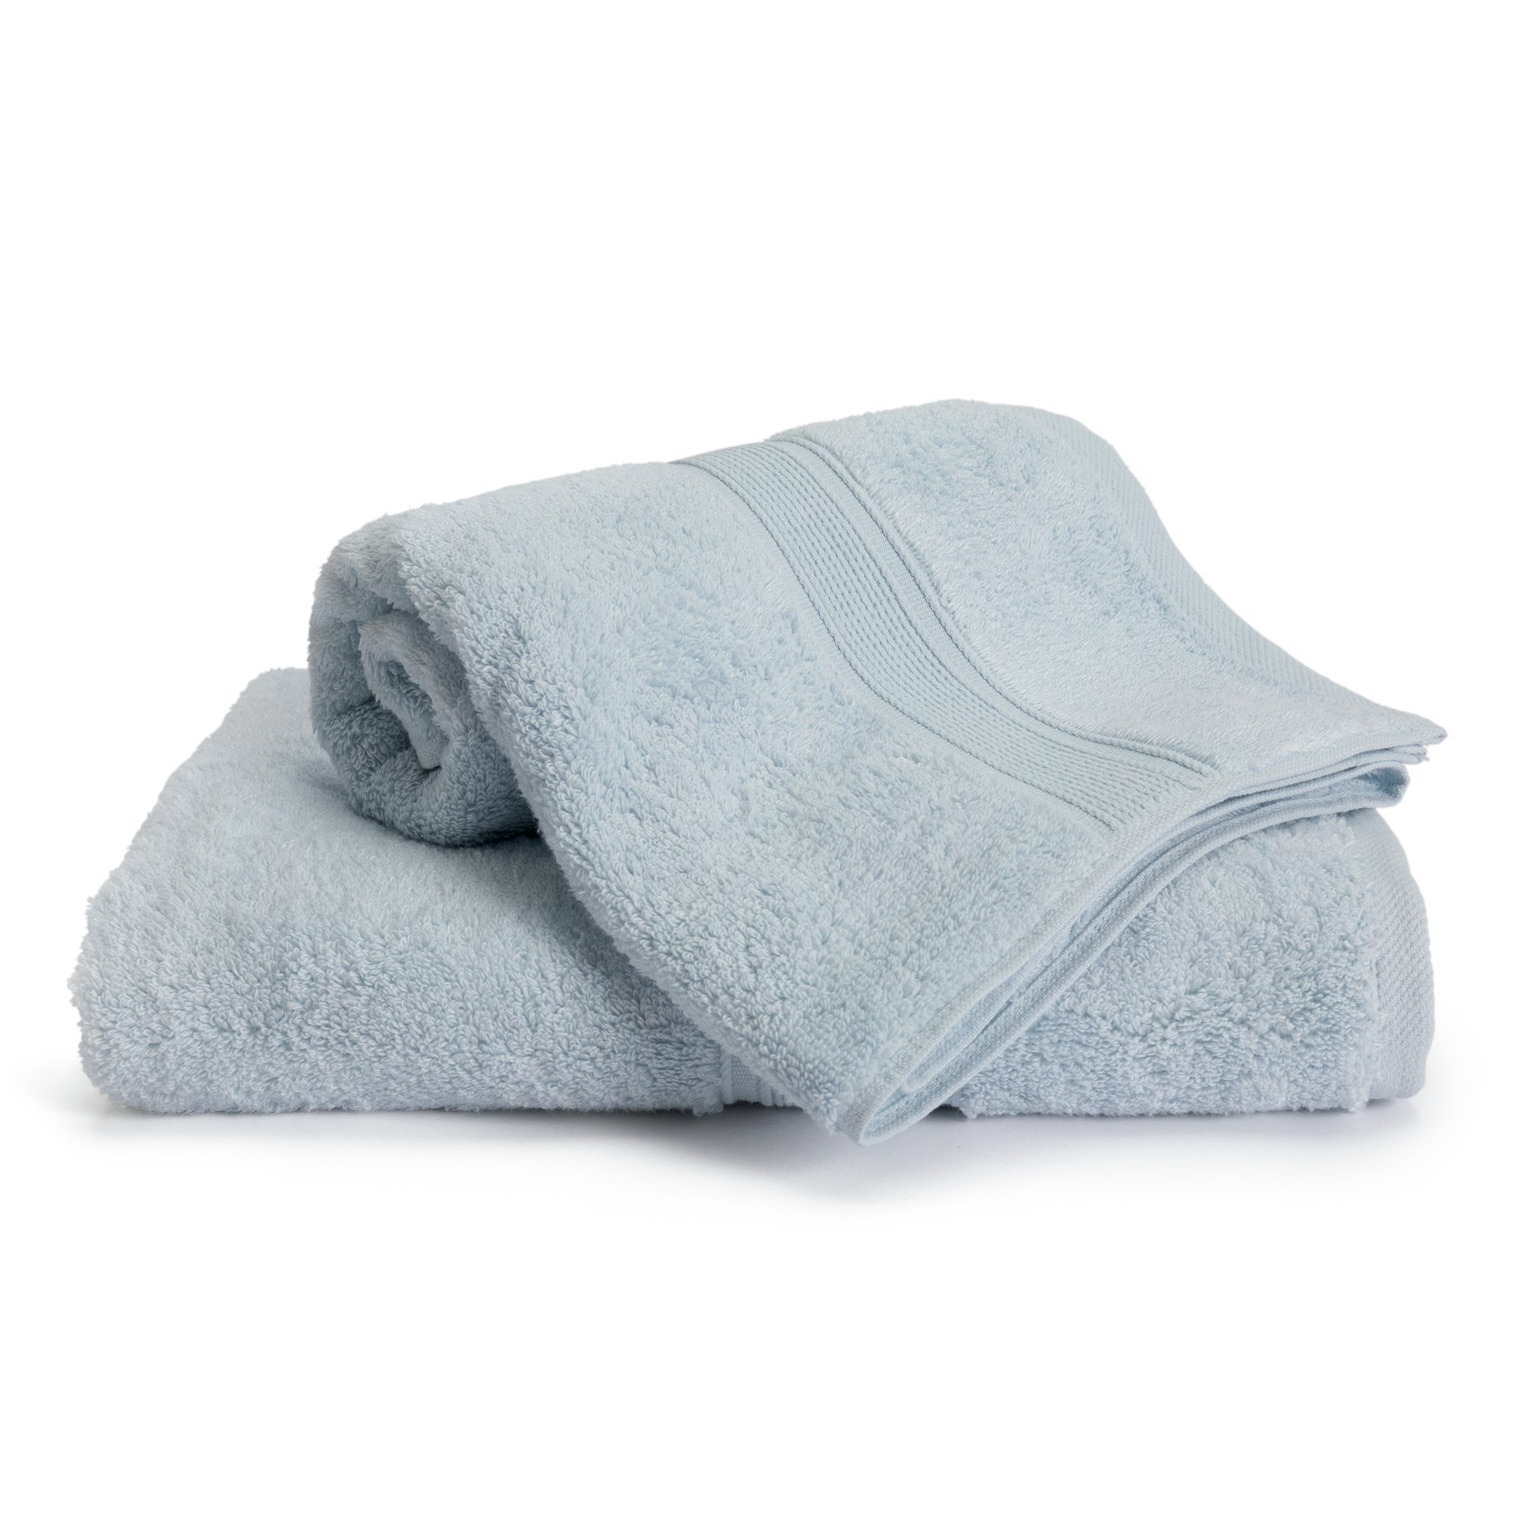 Habitat Cotton Supersoft 2 Pack Hand Towel - Country Blue - image 1